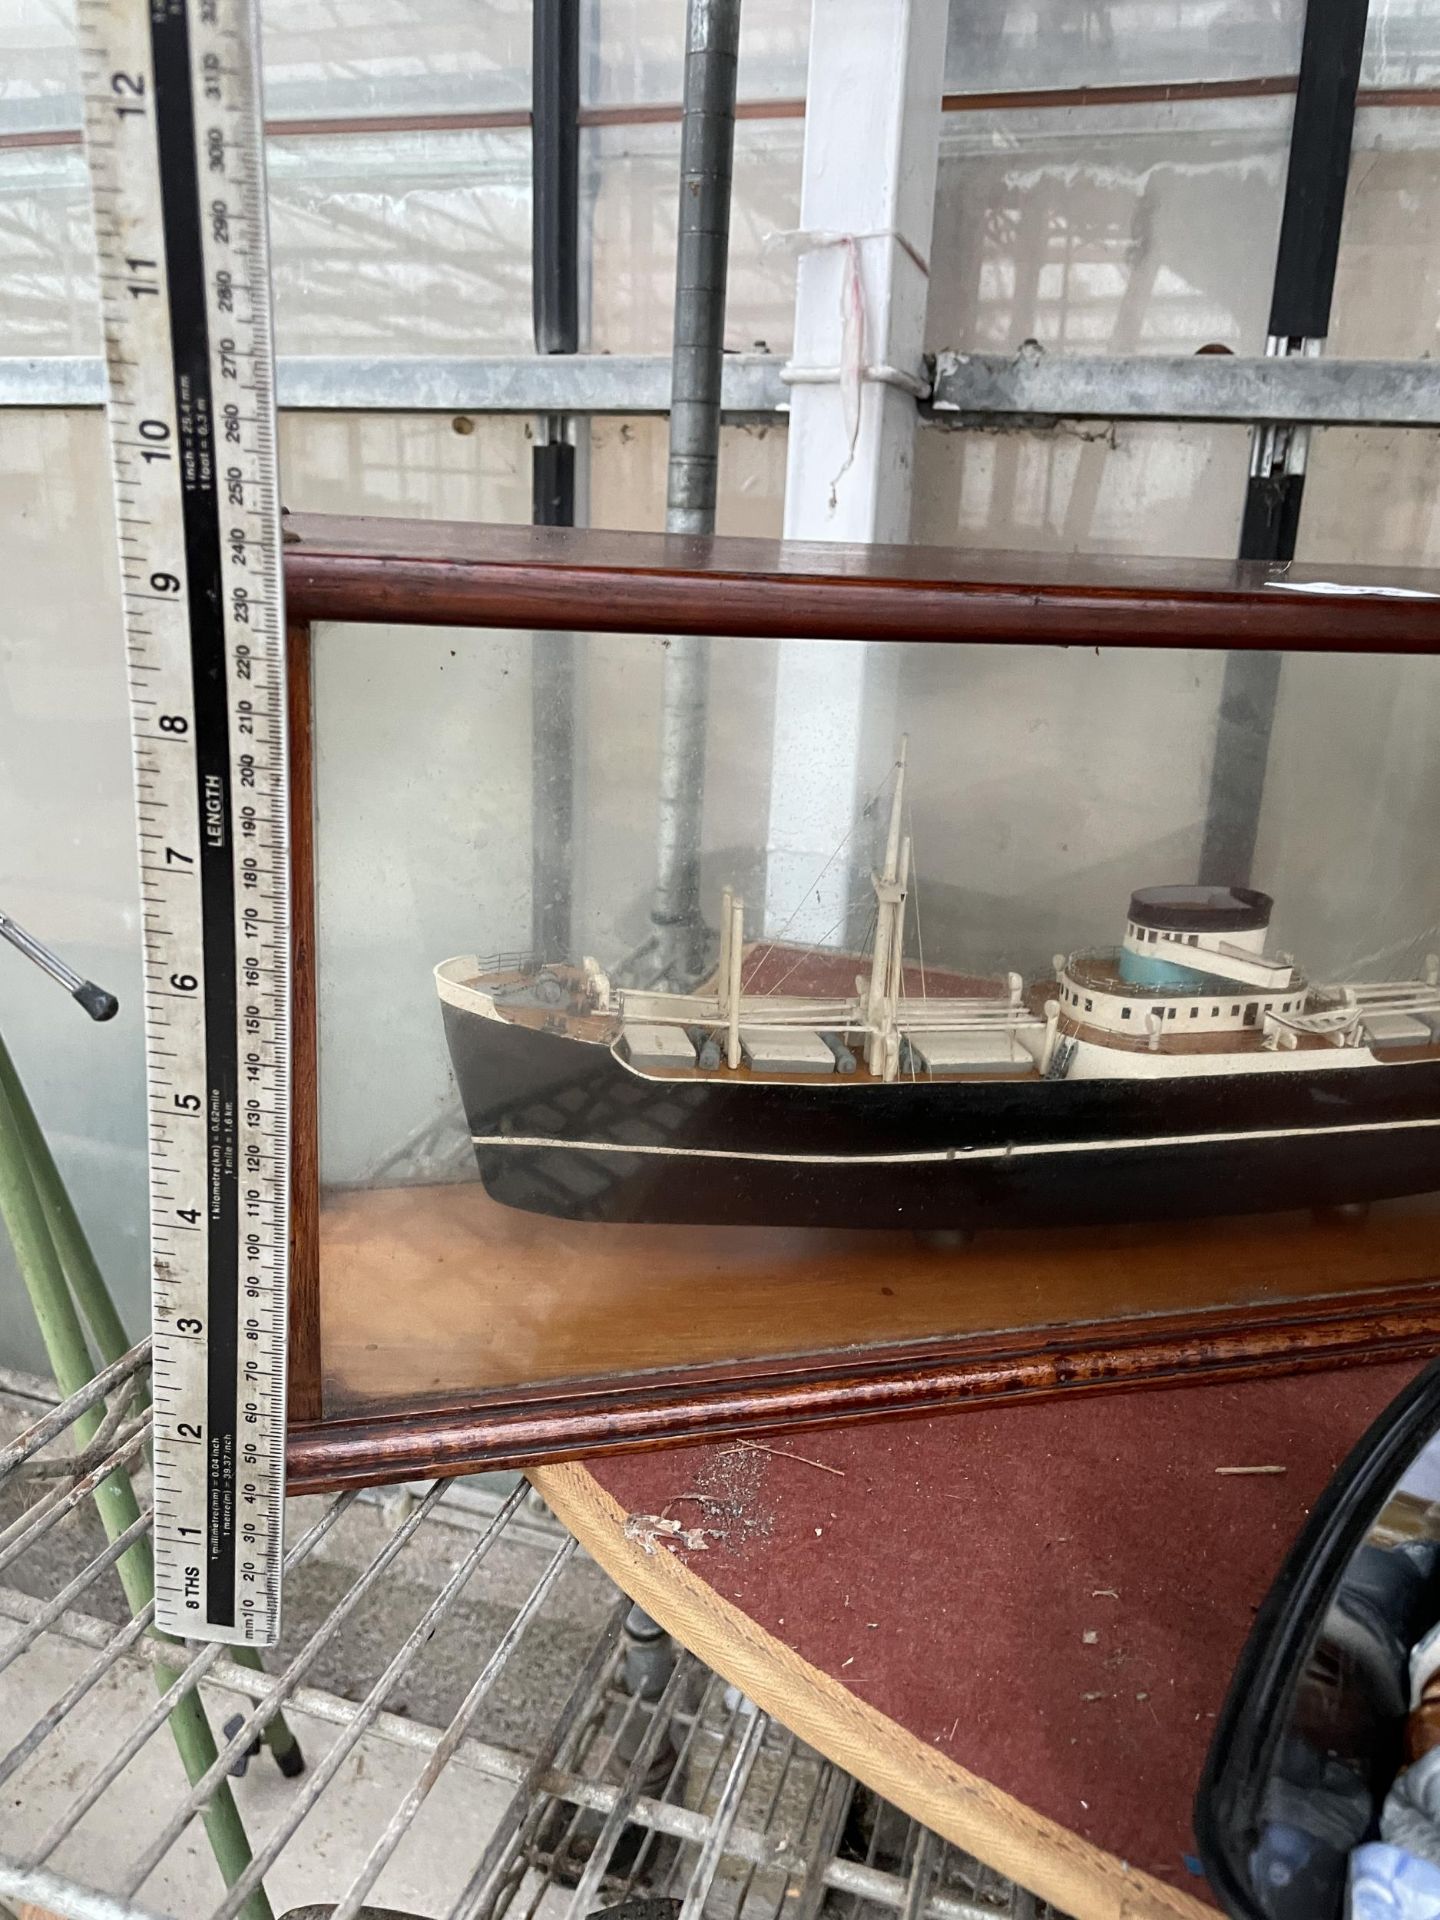 A MODEL OF A SHIP IN A GLASS DISPLAY CABINET - Image 6 of 6